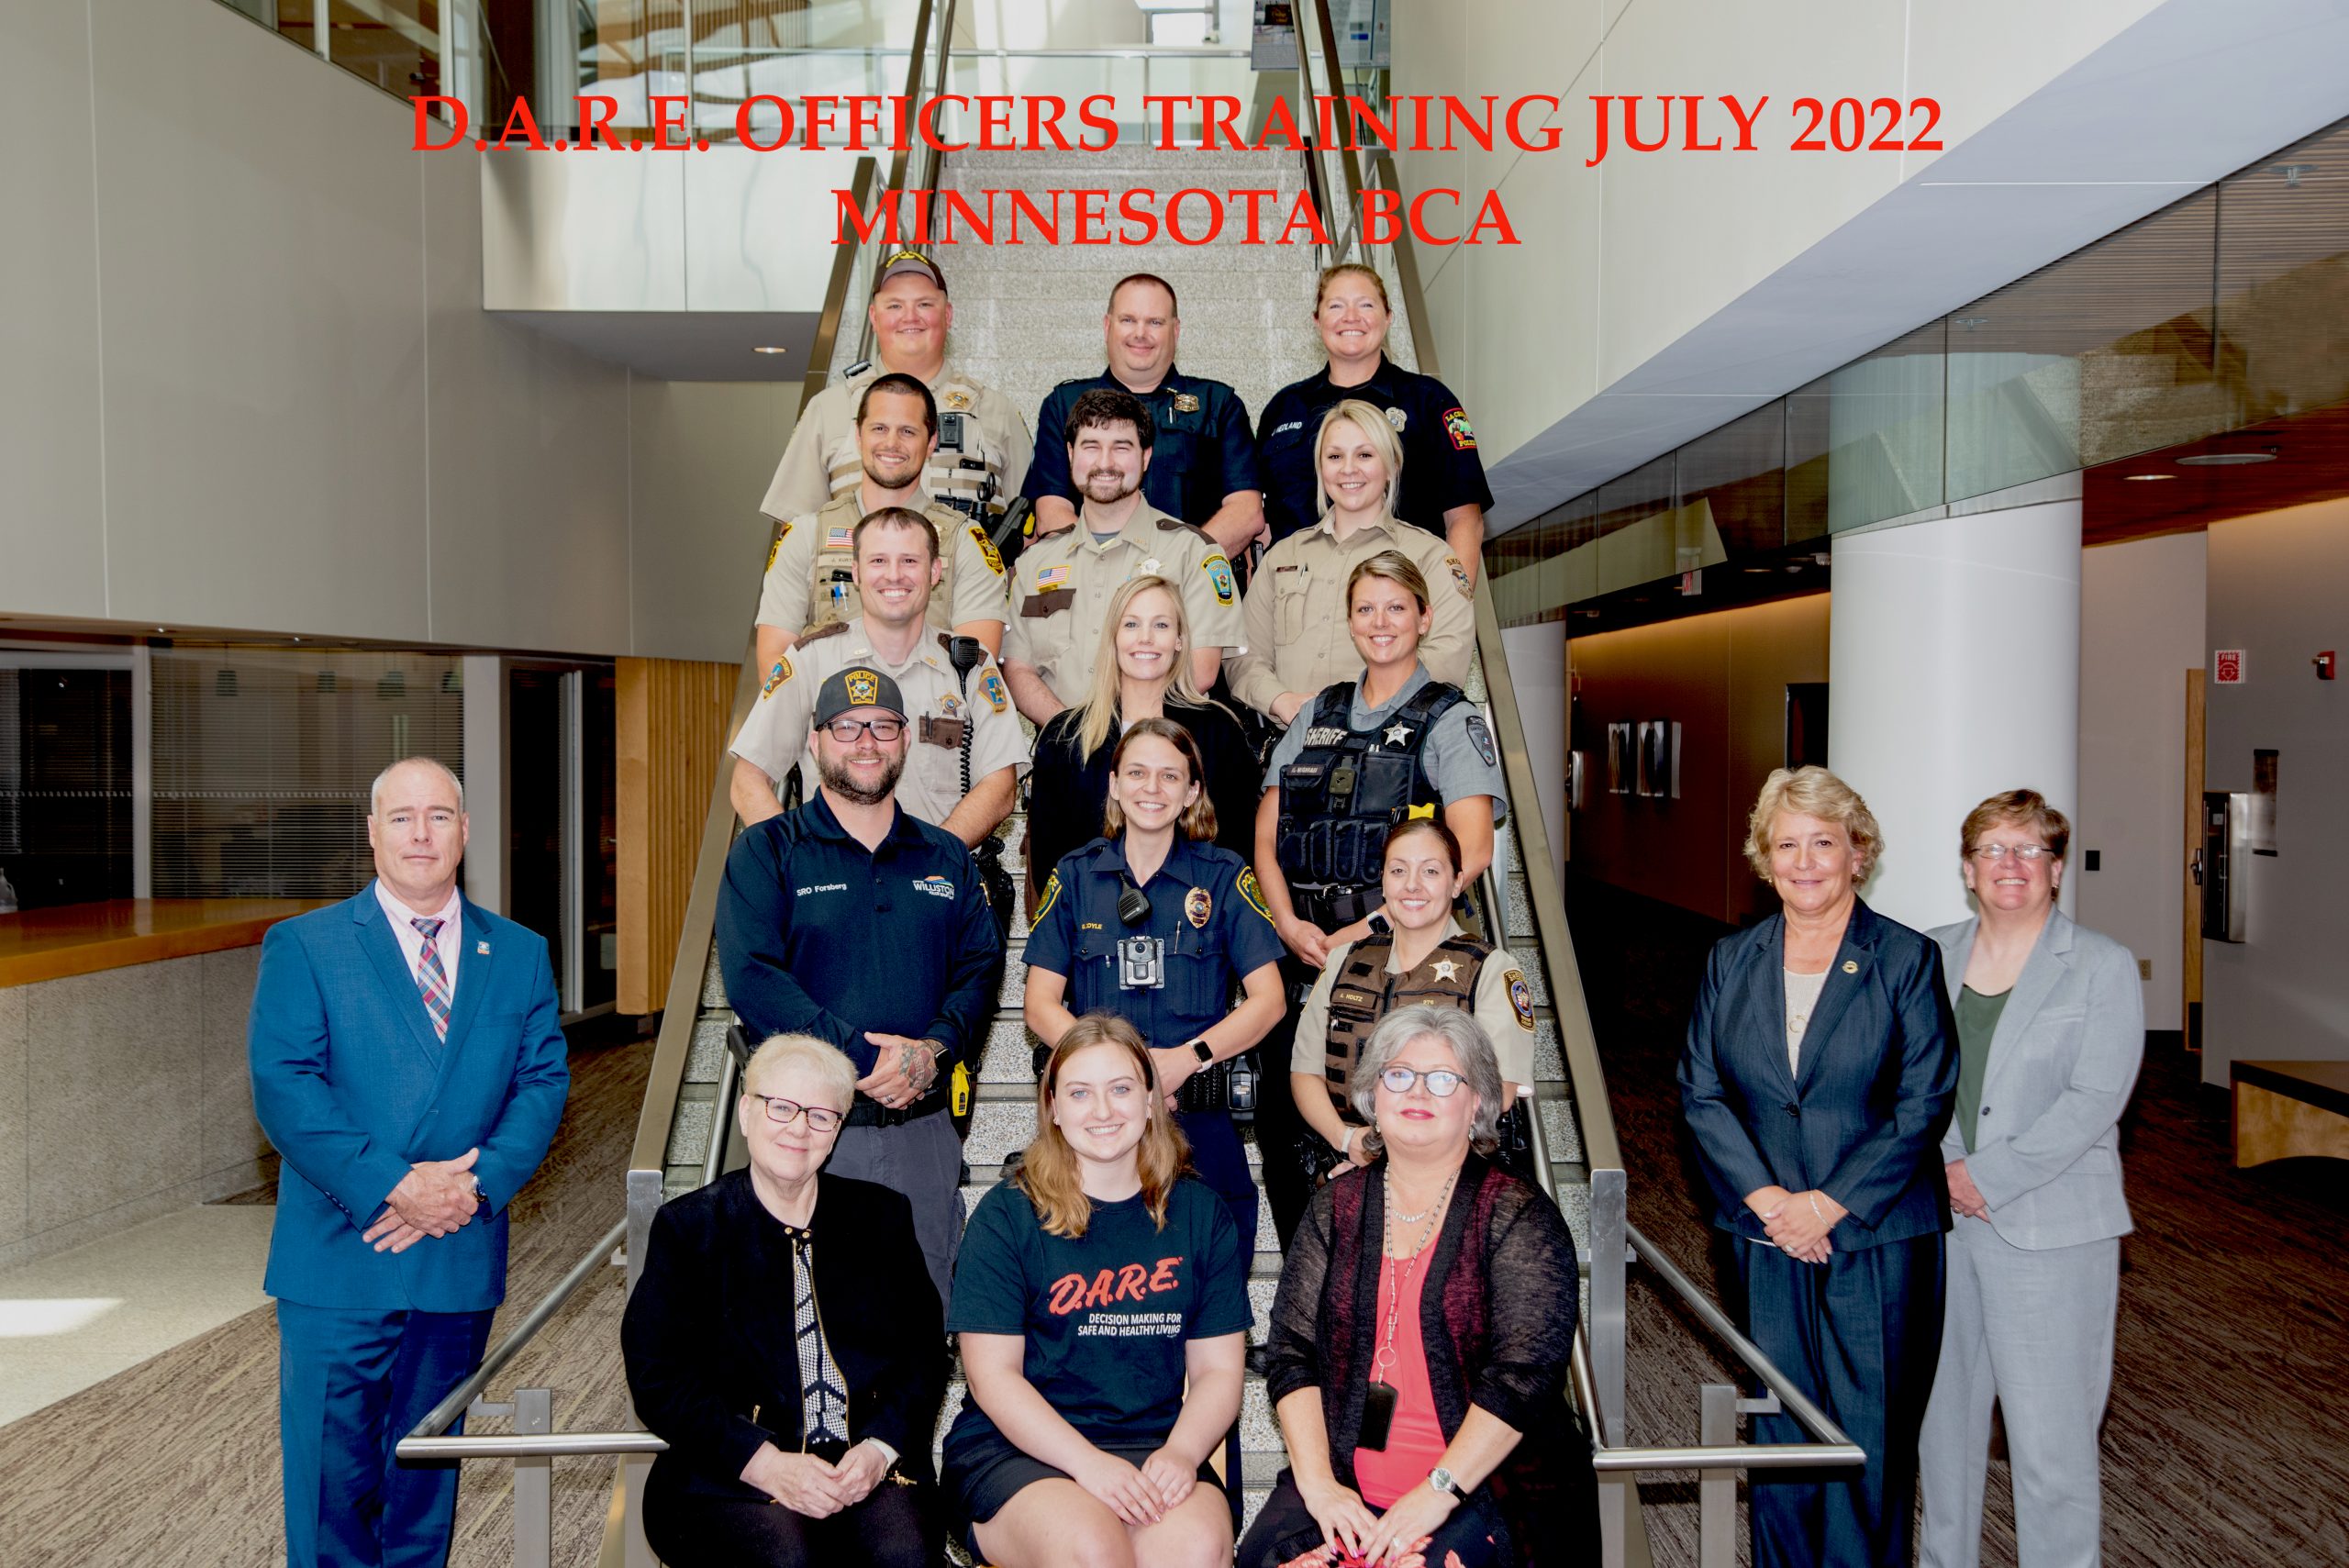 Class Photo from the D.A.R.E. Officer Training held on July 11 – 22, 2022 in Saint Paul, MN